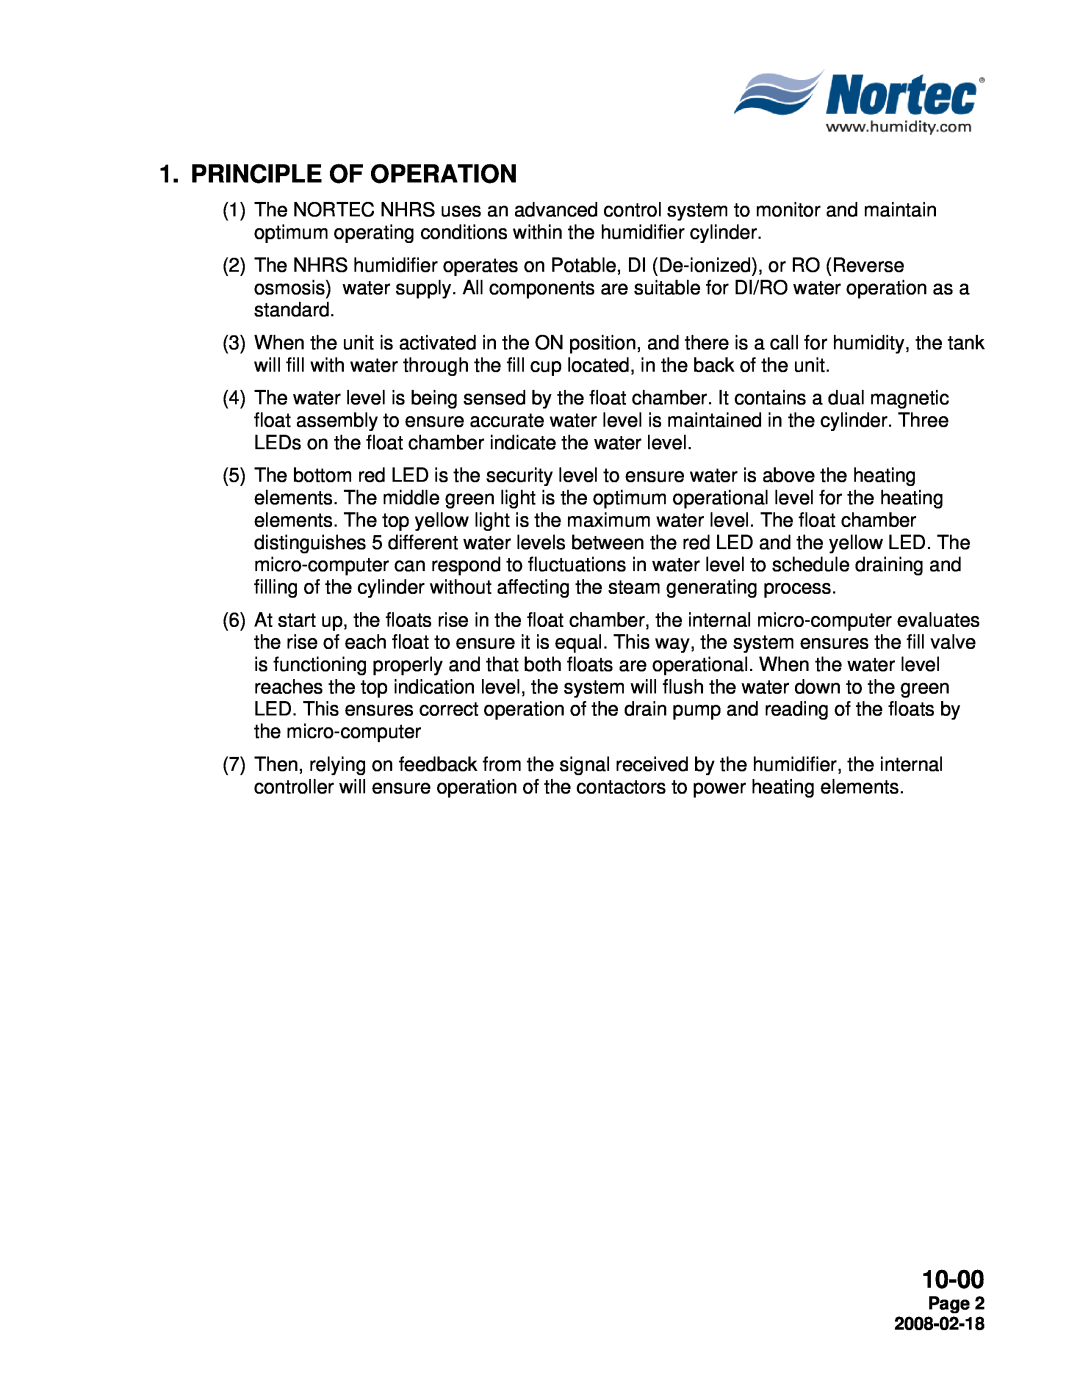 Nortec Industries NHRS Series manual Principle Of Operation, 10-00, Page 